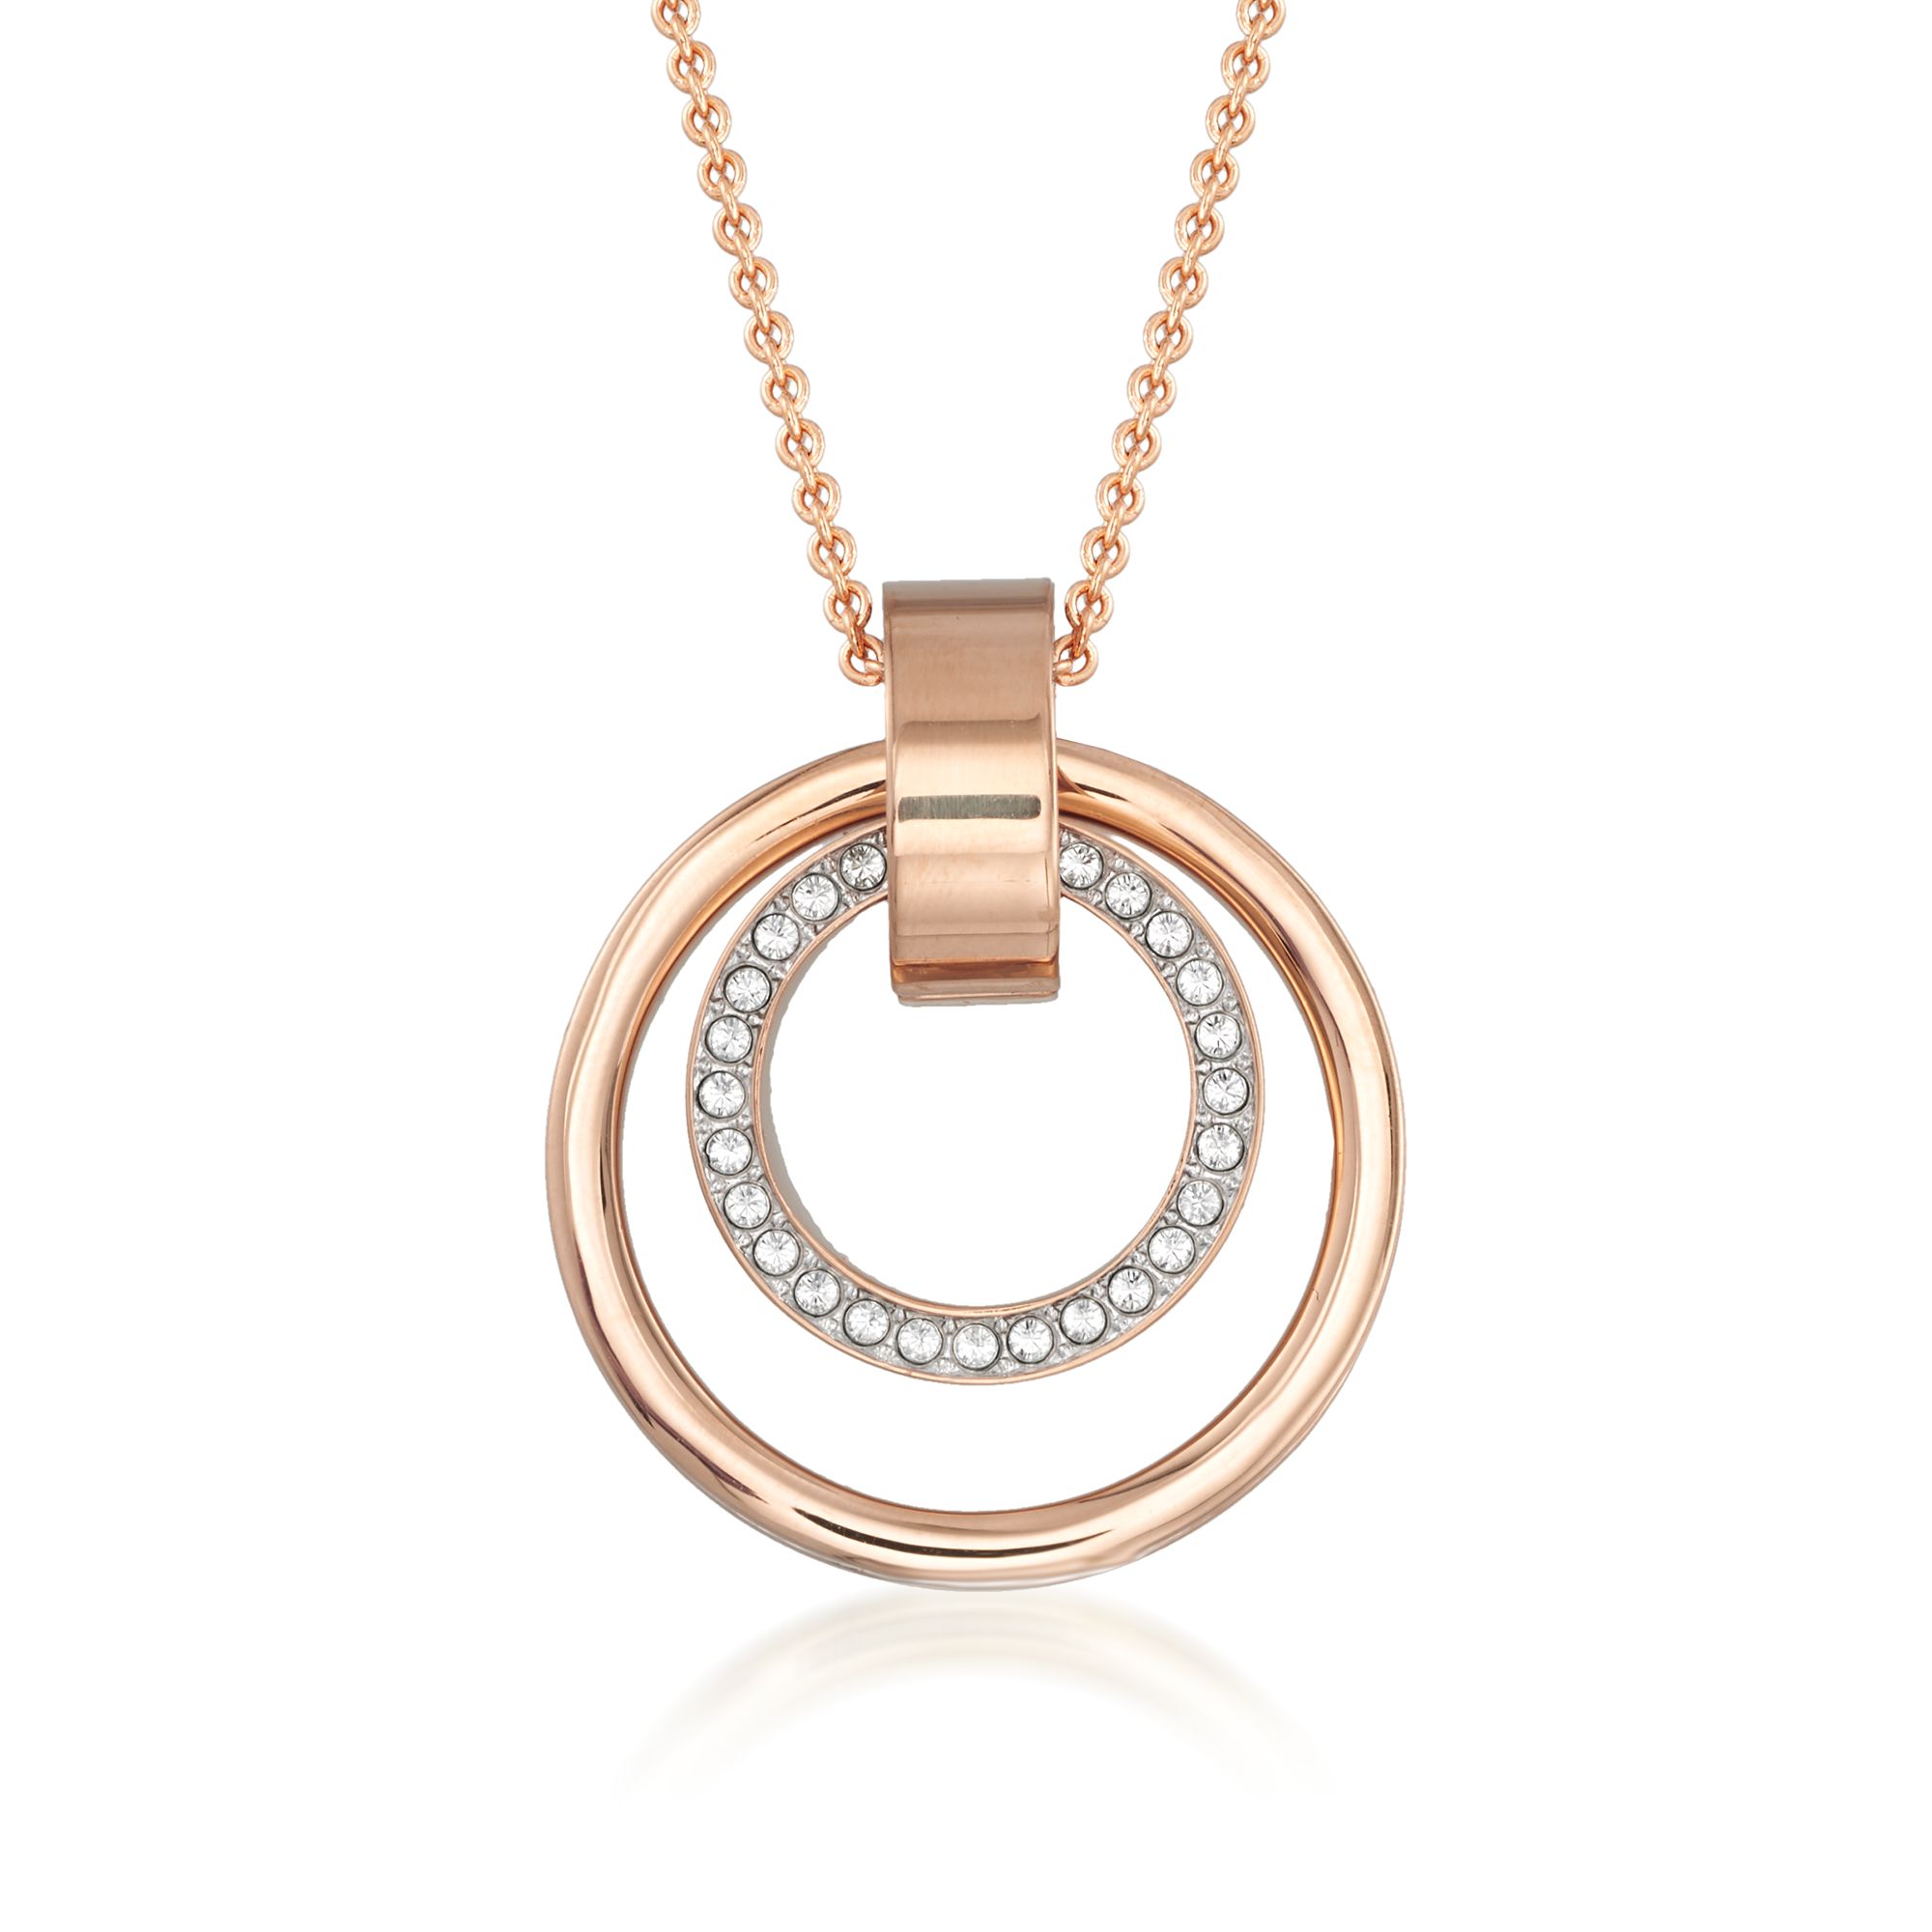 Swarovski Crystal "Hollow" Pave Crystal Medium Double Circle Pendant  Necklace in Rose Gold Plate | Ross-Simons